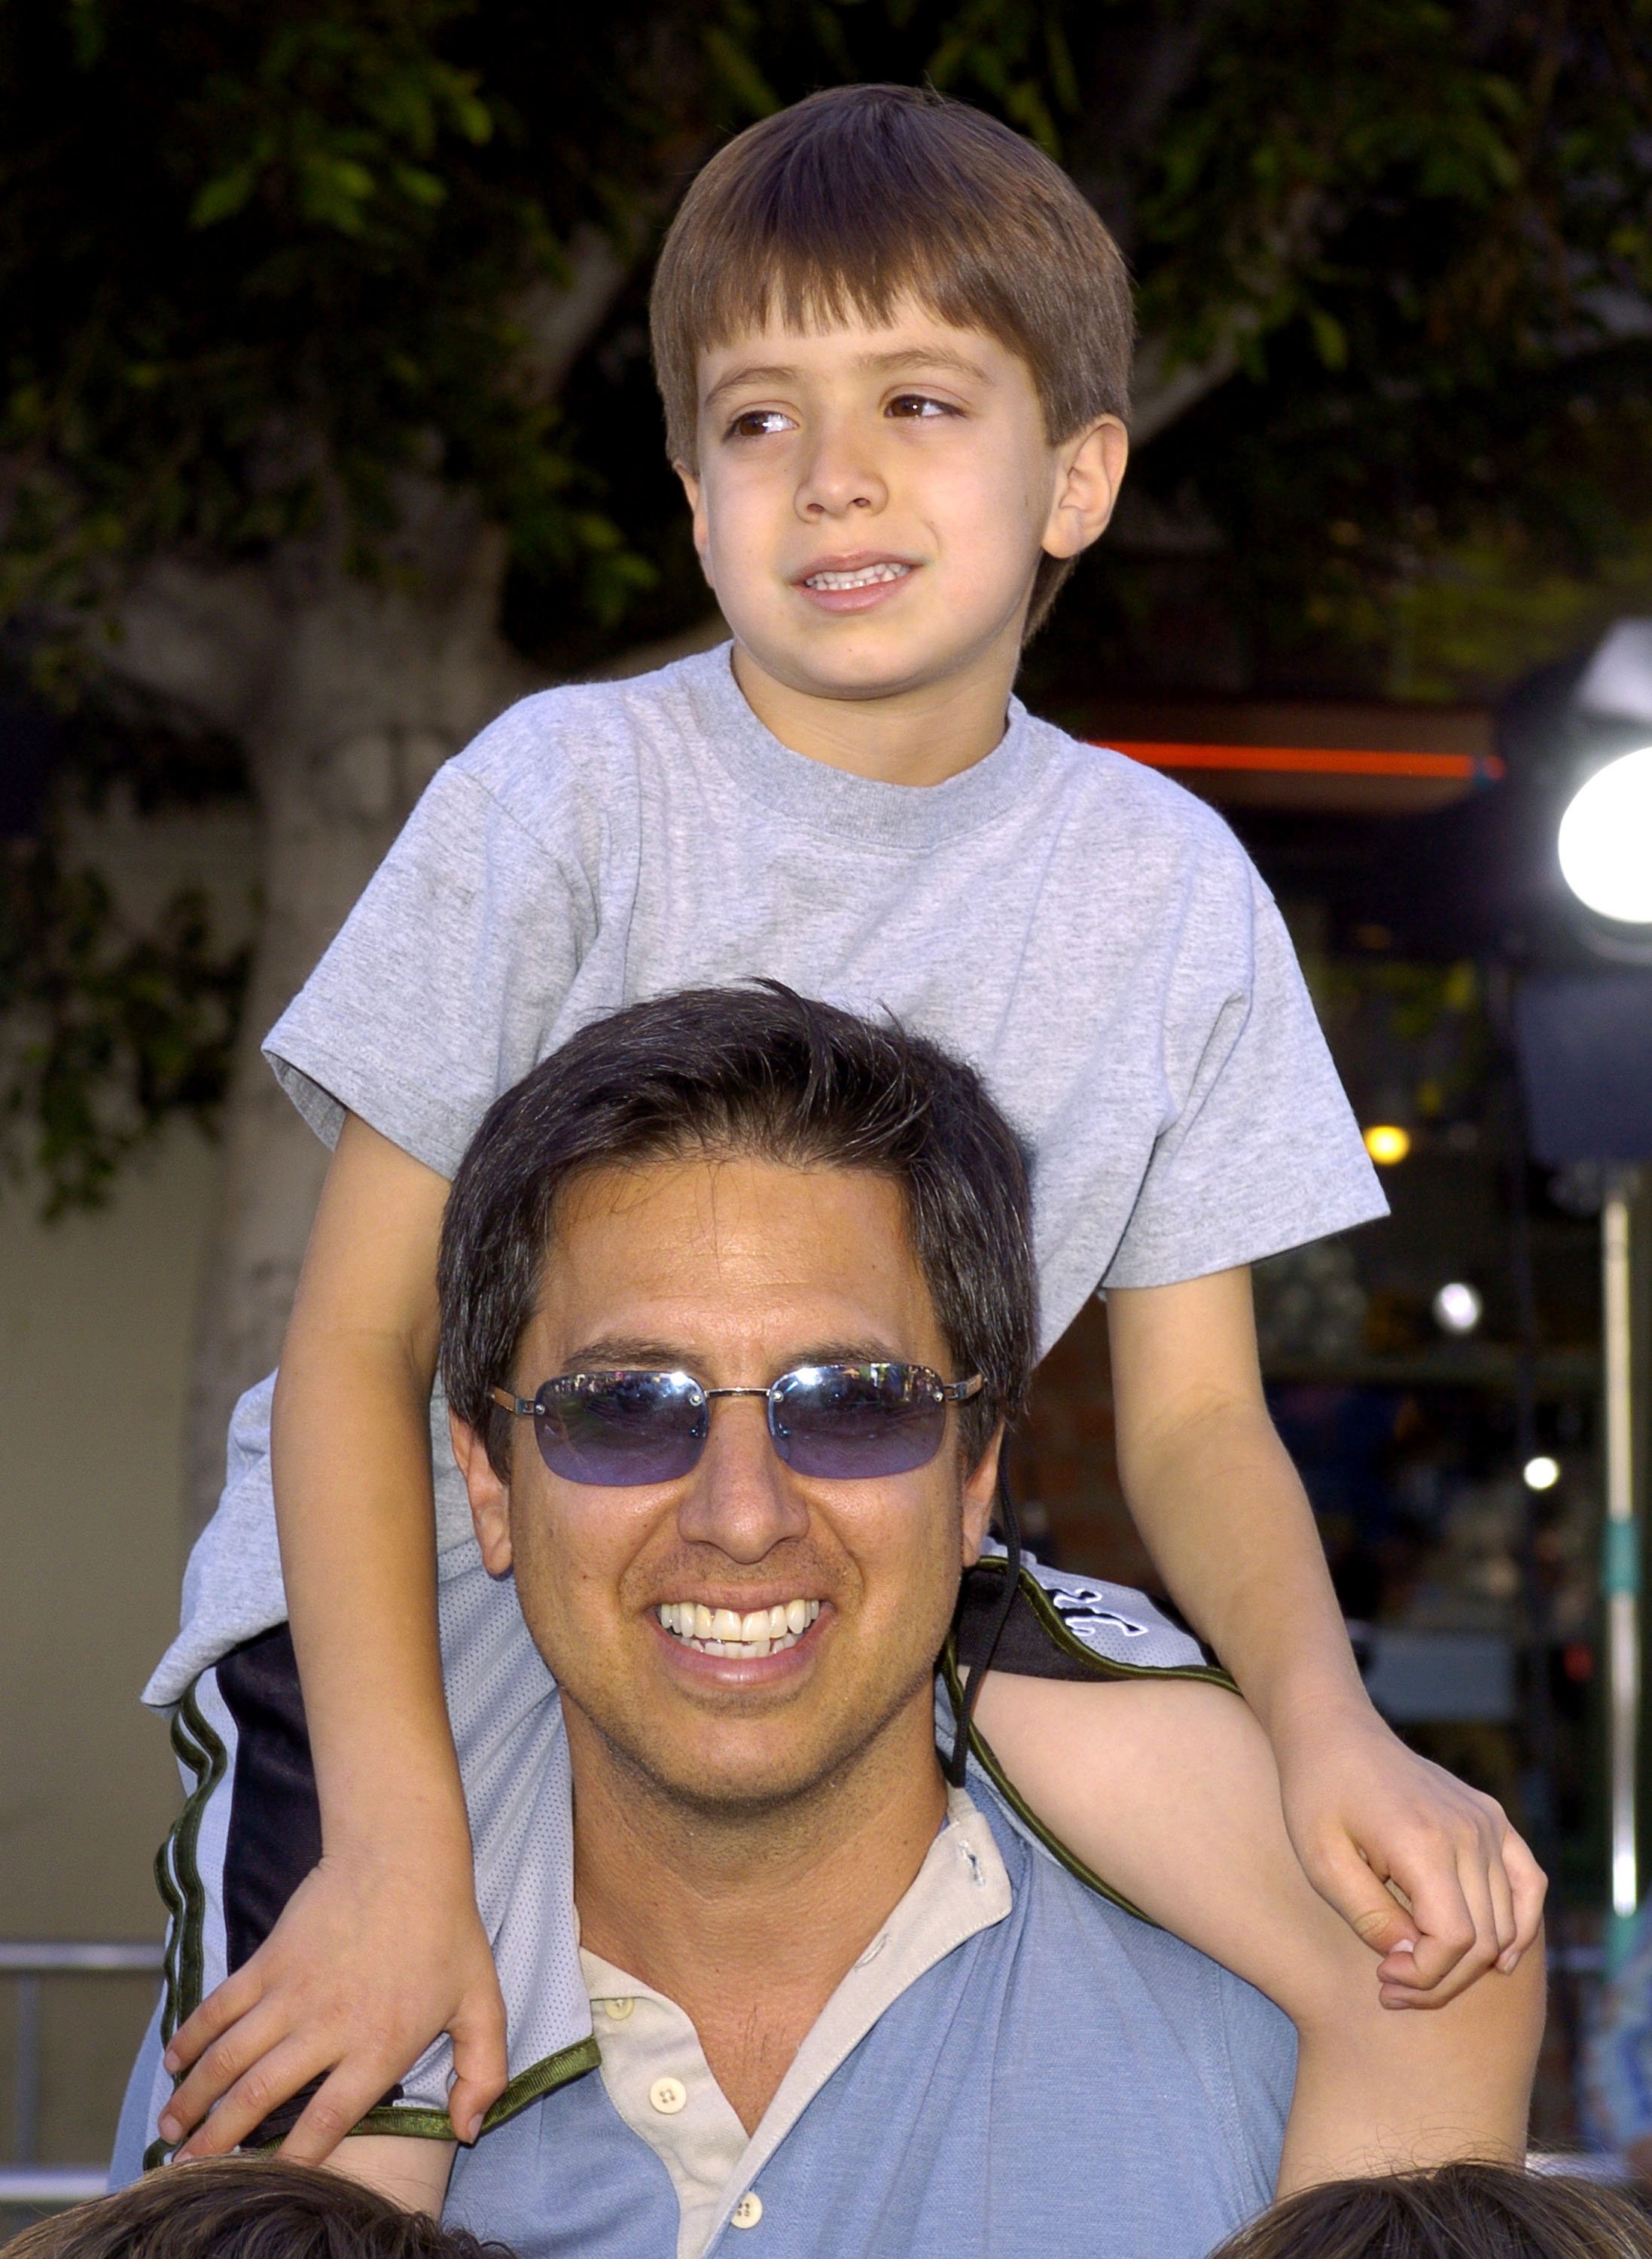 Ray Romano and son during the Los Angeles premiere of "Shrek 2" at Mann Village Theatre in Westwood, California | Source: Getty Images